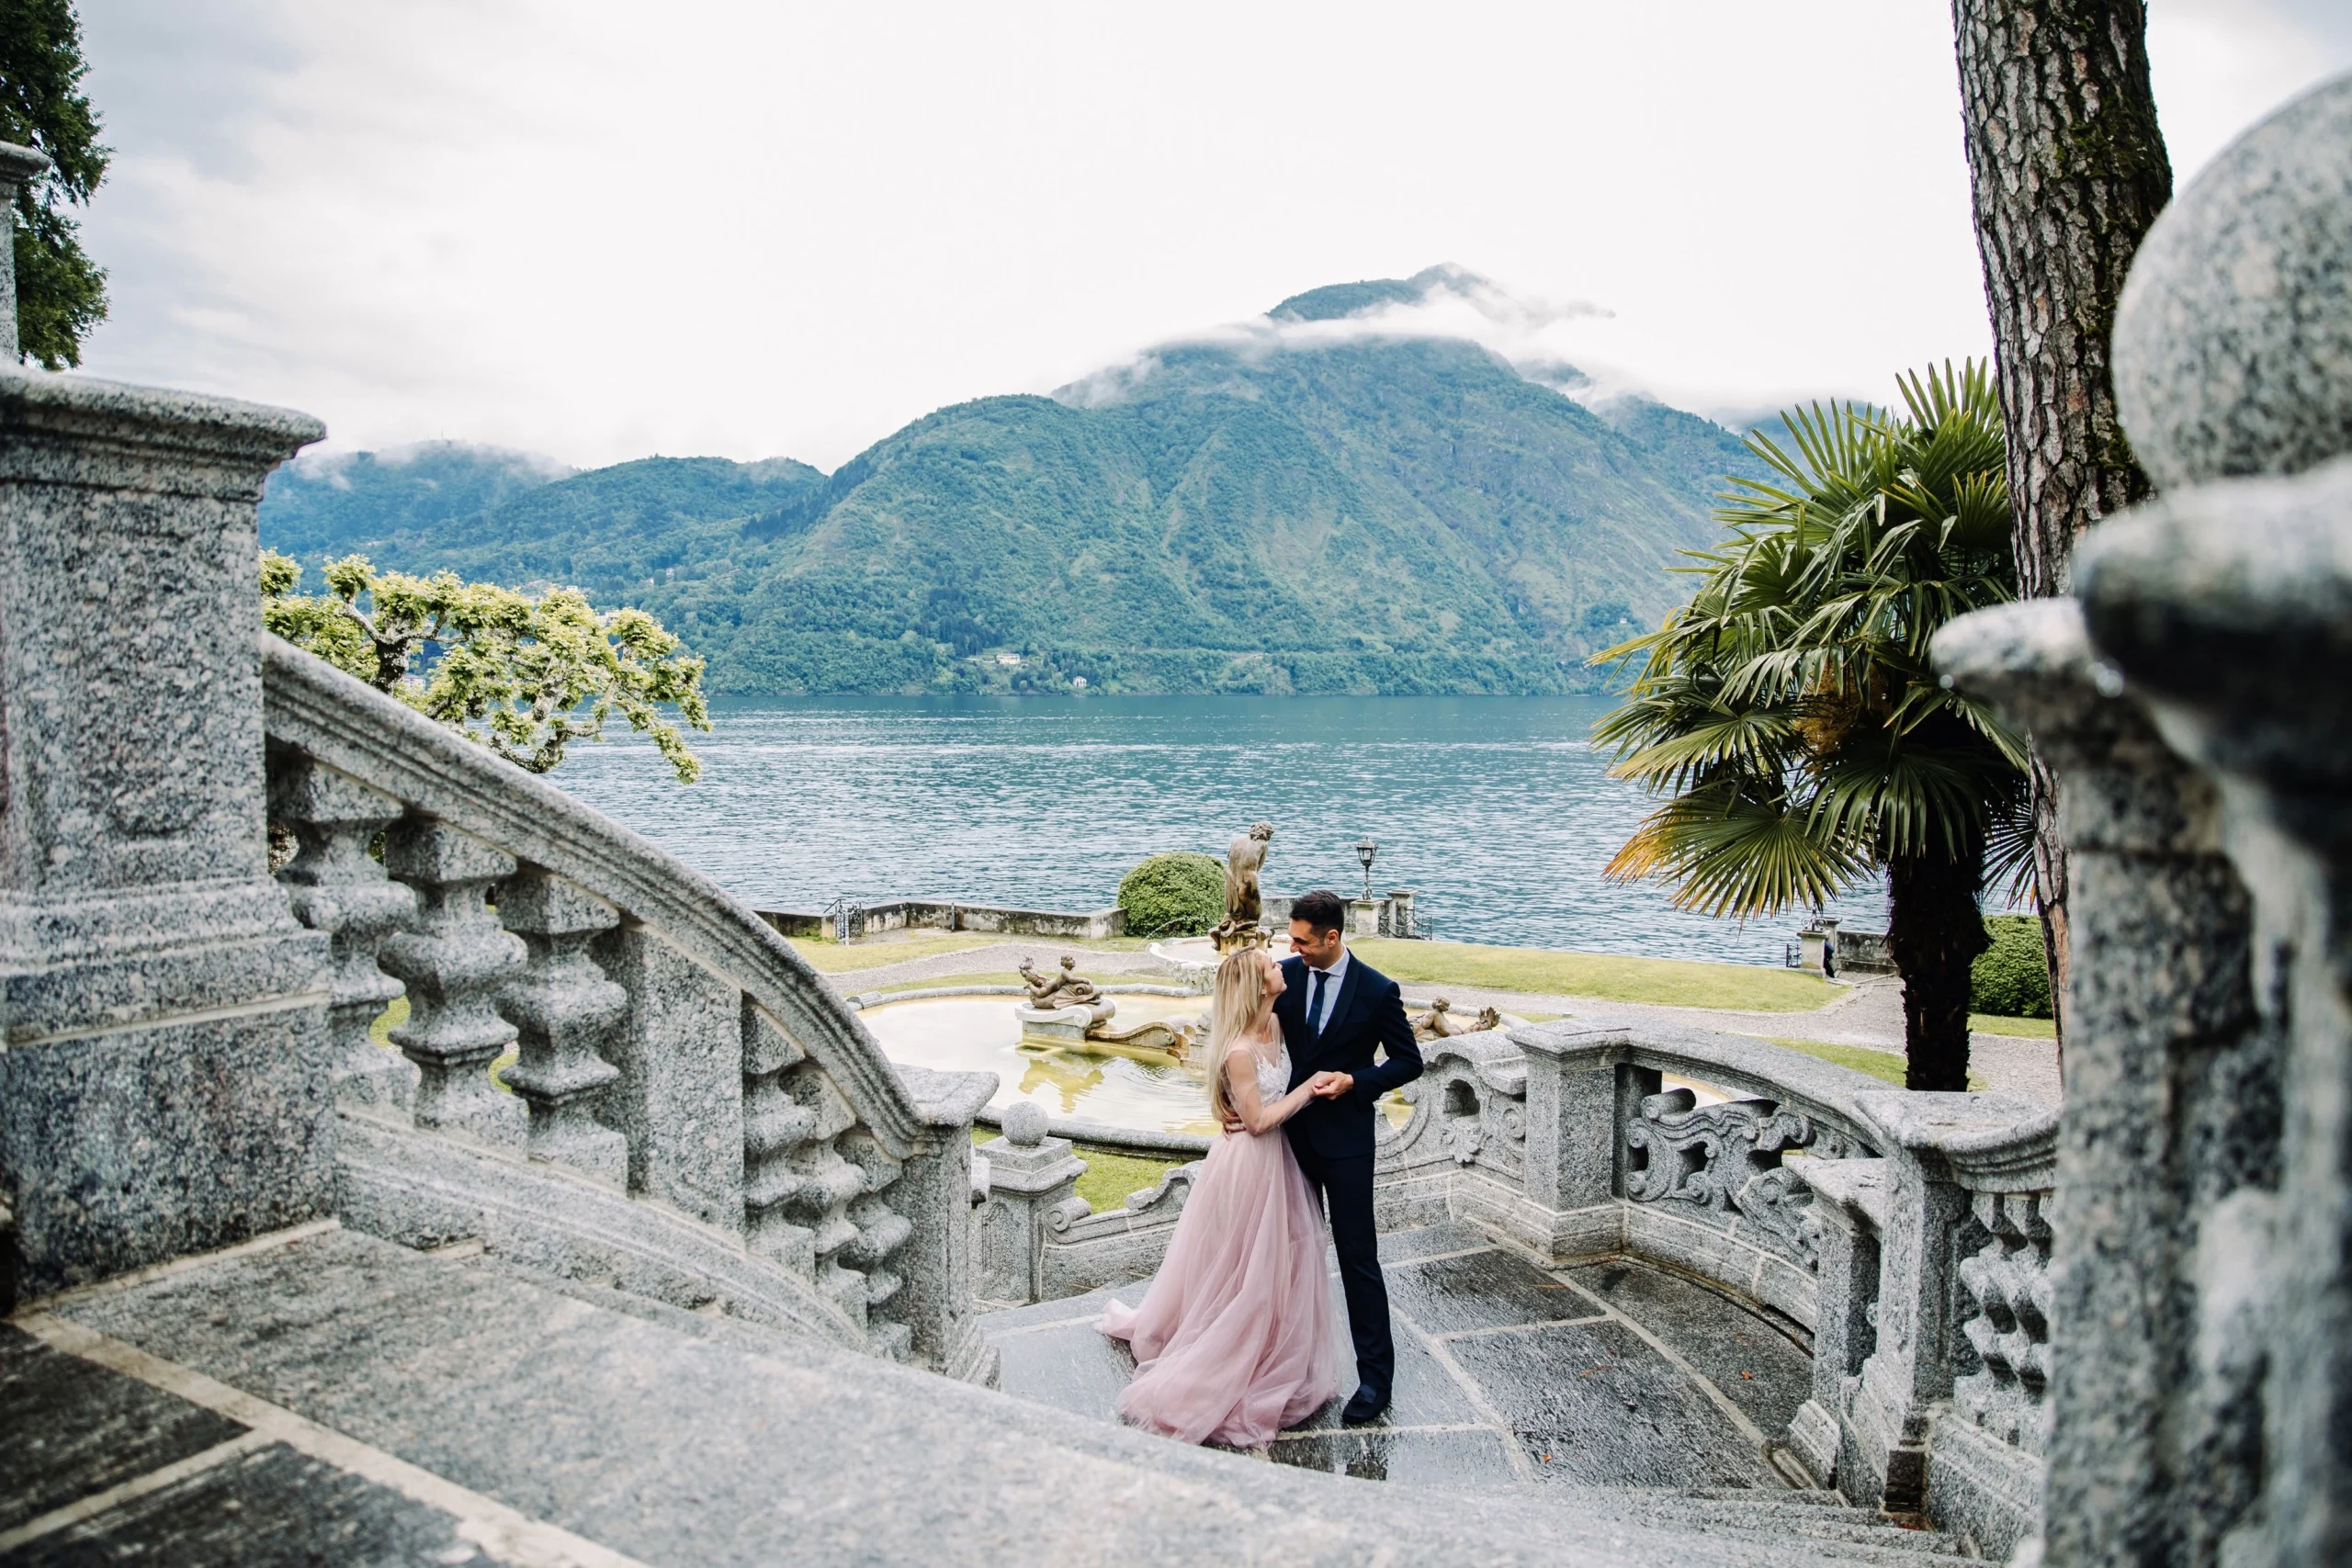 Kristal Kim and Cole Hennessey’s $200K Lake Como Wedding Goes Viral After Champagne Shower